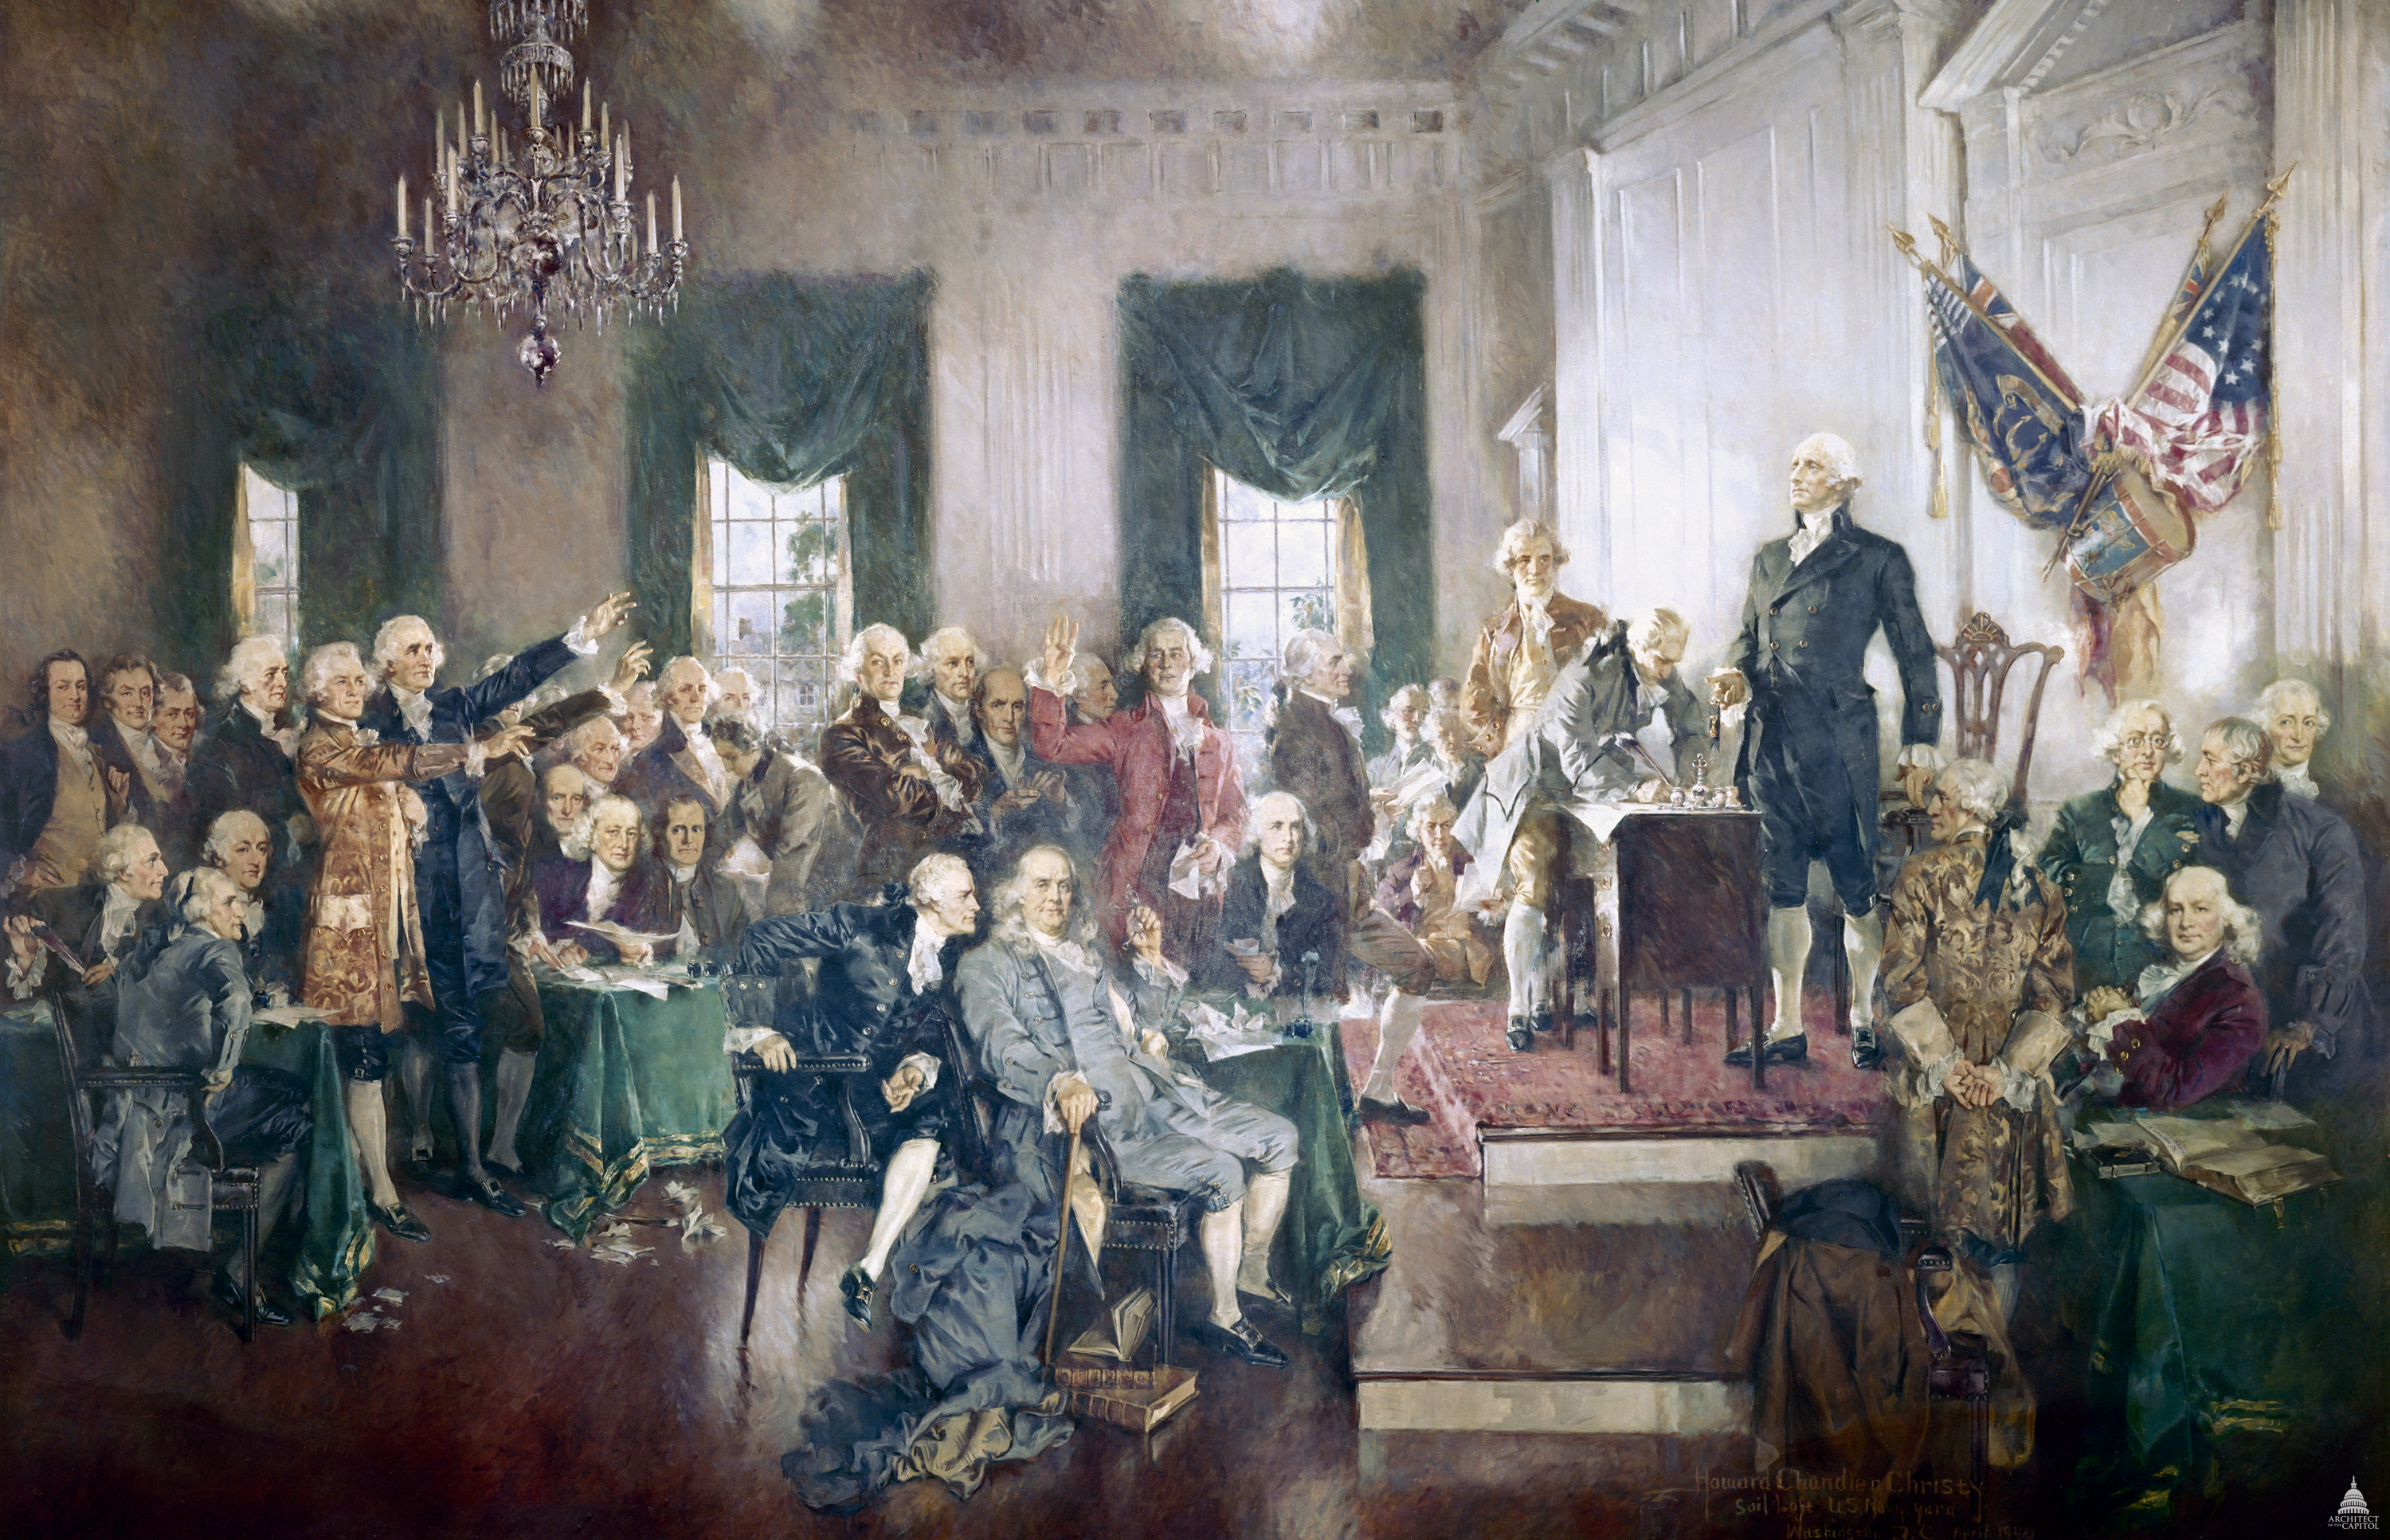 Howard Chandler Christy’s painting of the signing of the United States Constitution